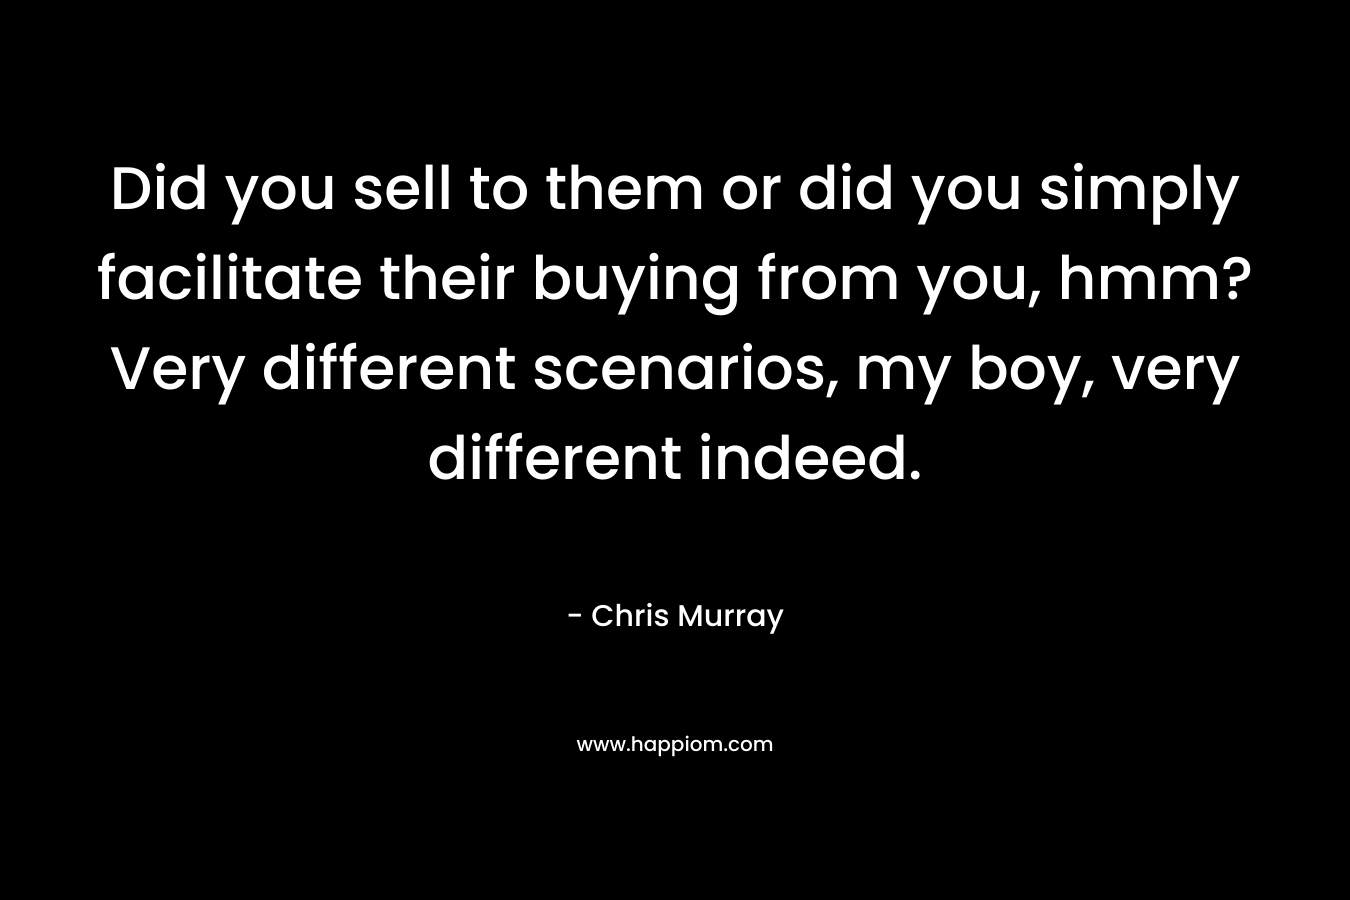 Did you sell to them or did you simply facilitate their buying from you, hmm? Very different scenarios, my boy, very different indeed.